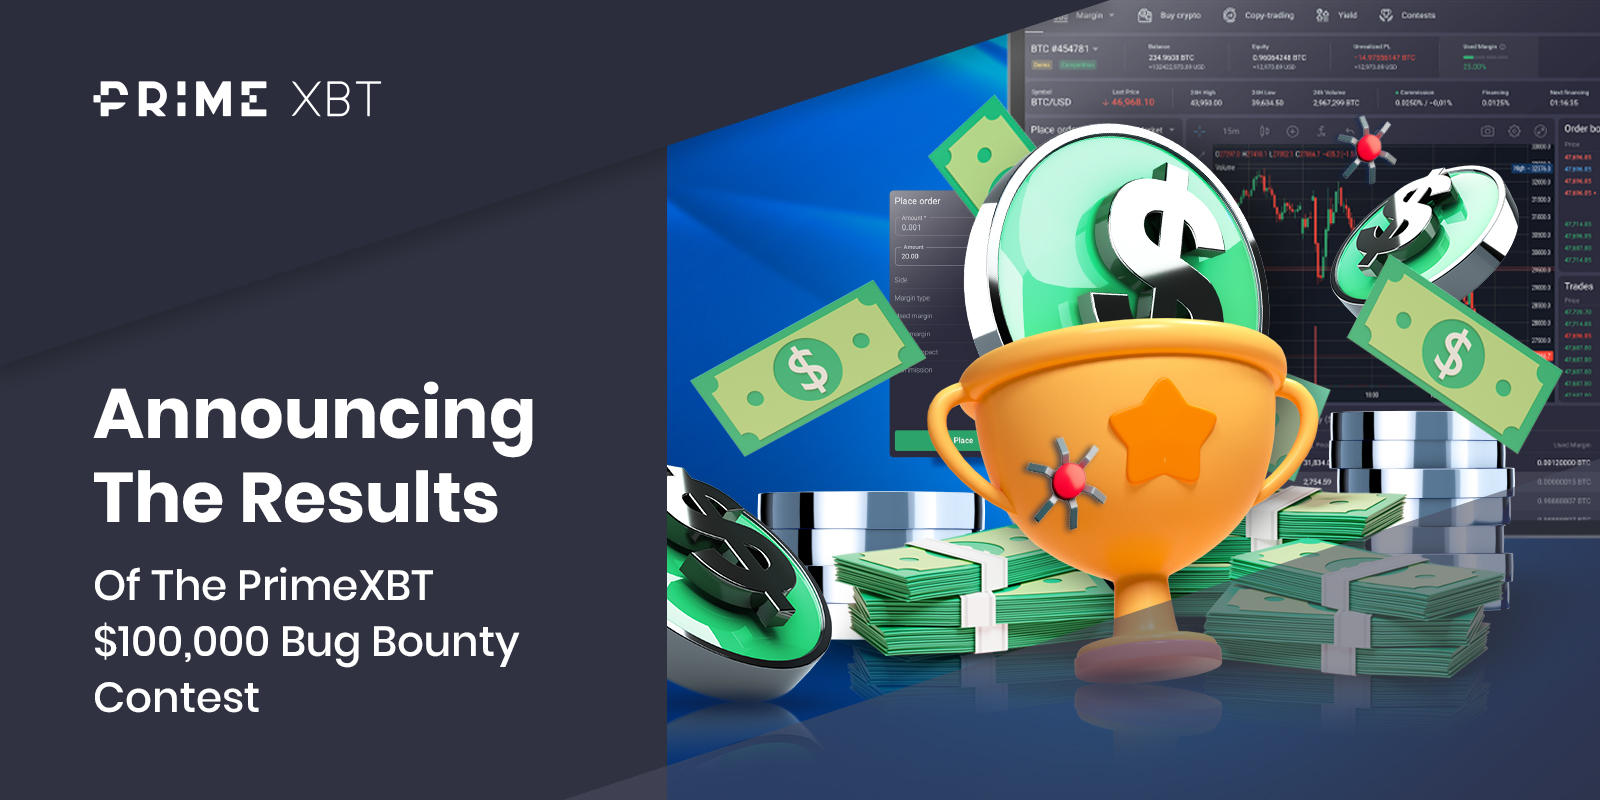 Announcing The Results Of The PrimeXBT $100,000 Bug Bounty Contest - IMG 1997